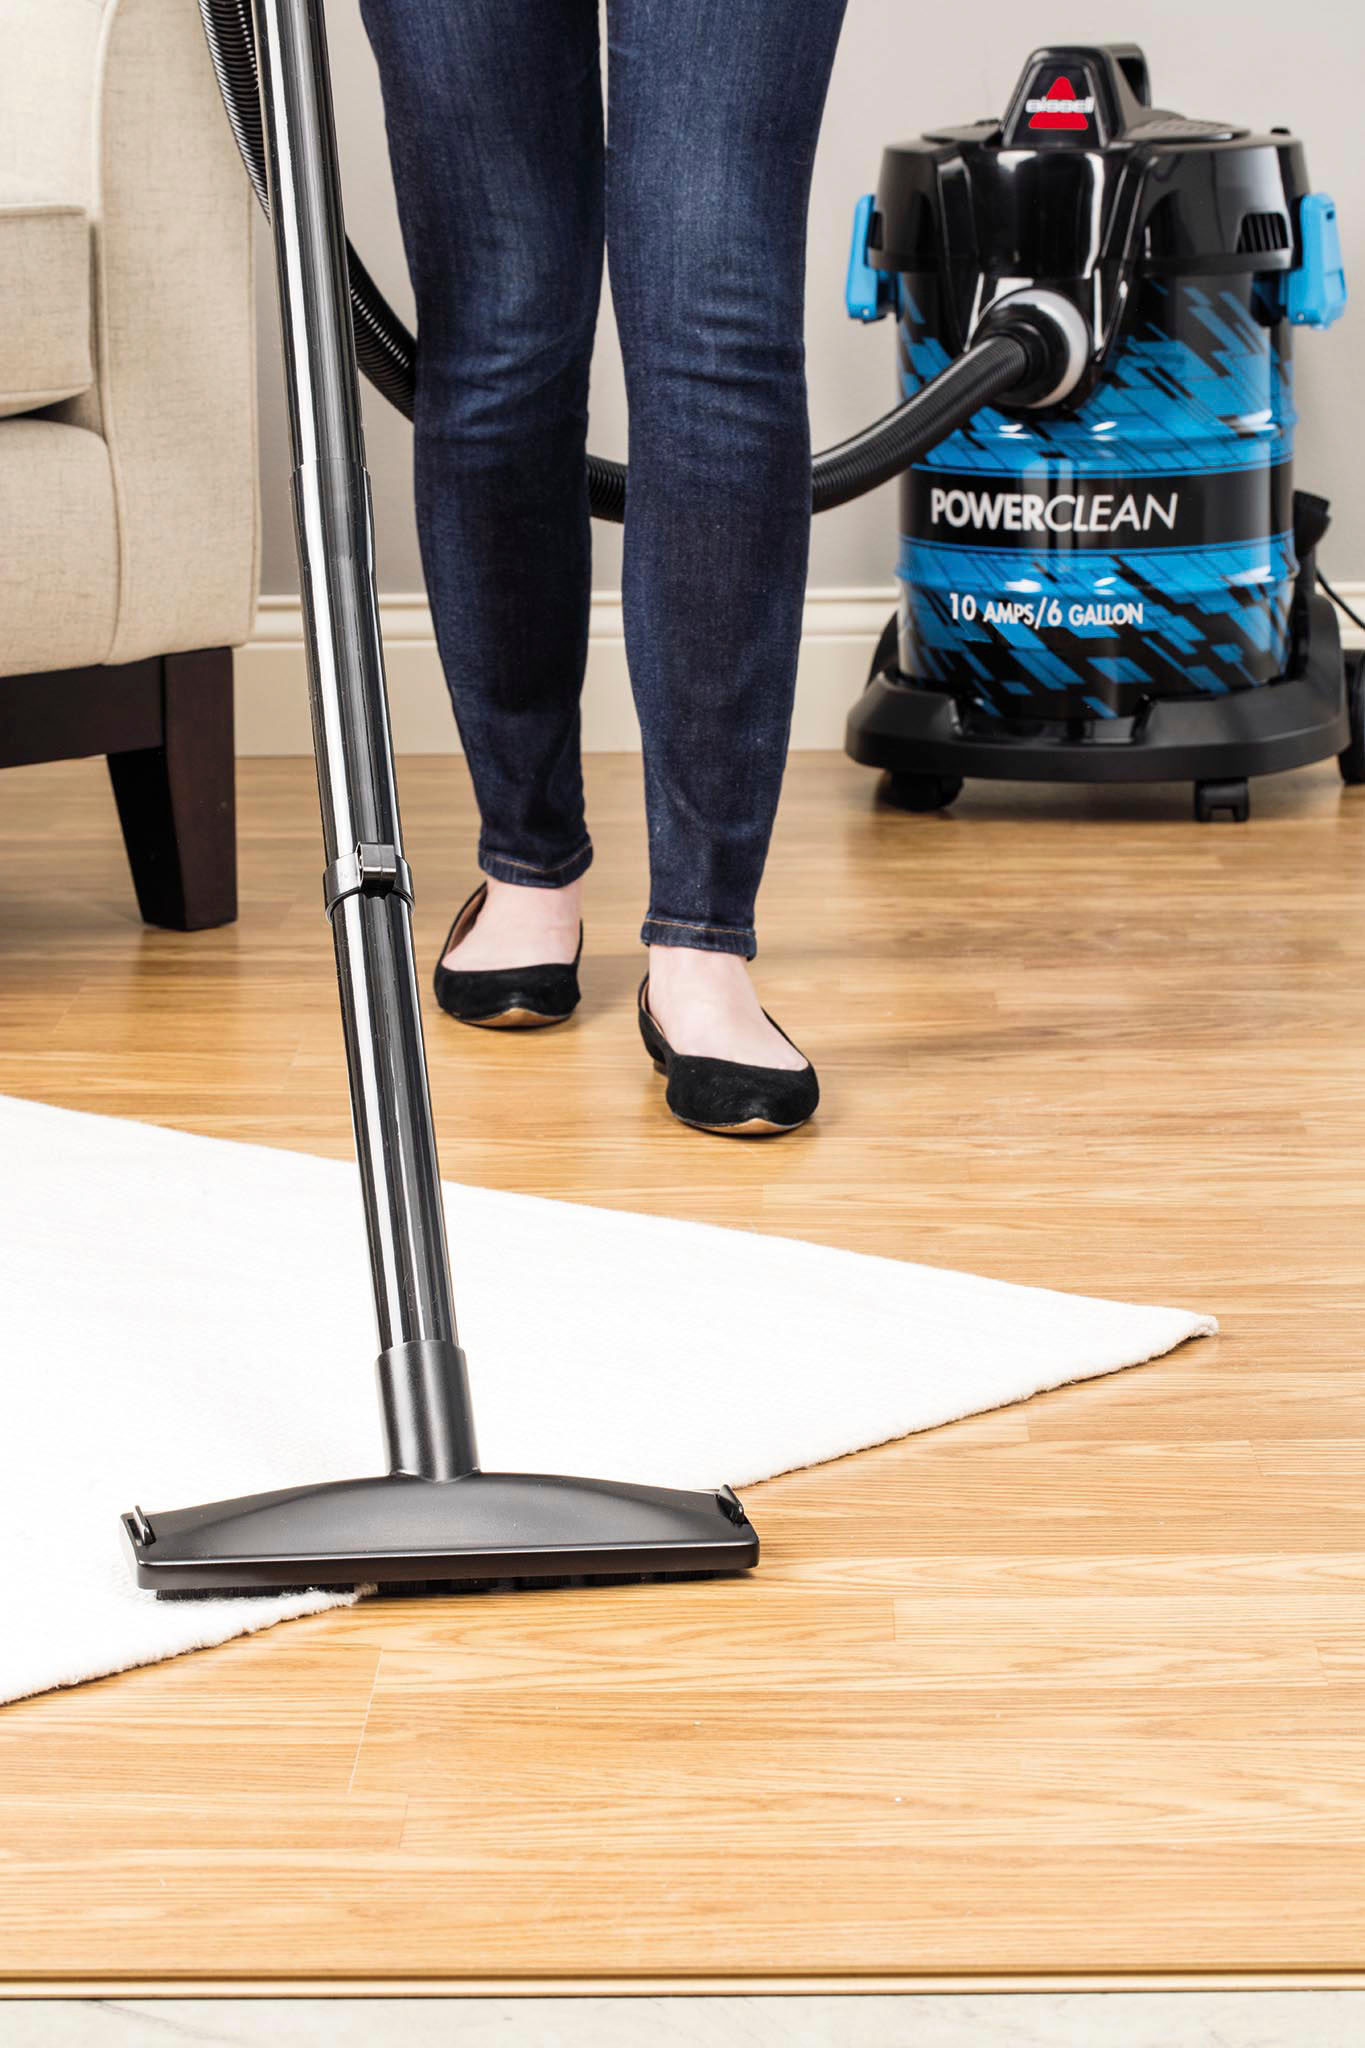 Back View: BISSELL - PowerClean Wet and Dry Canister Vacuum - Black with Baha Blue Accents